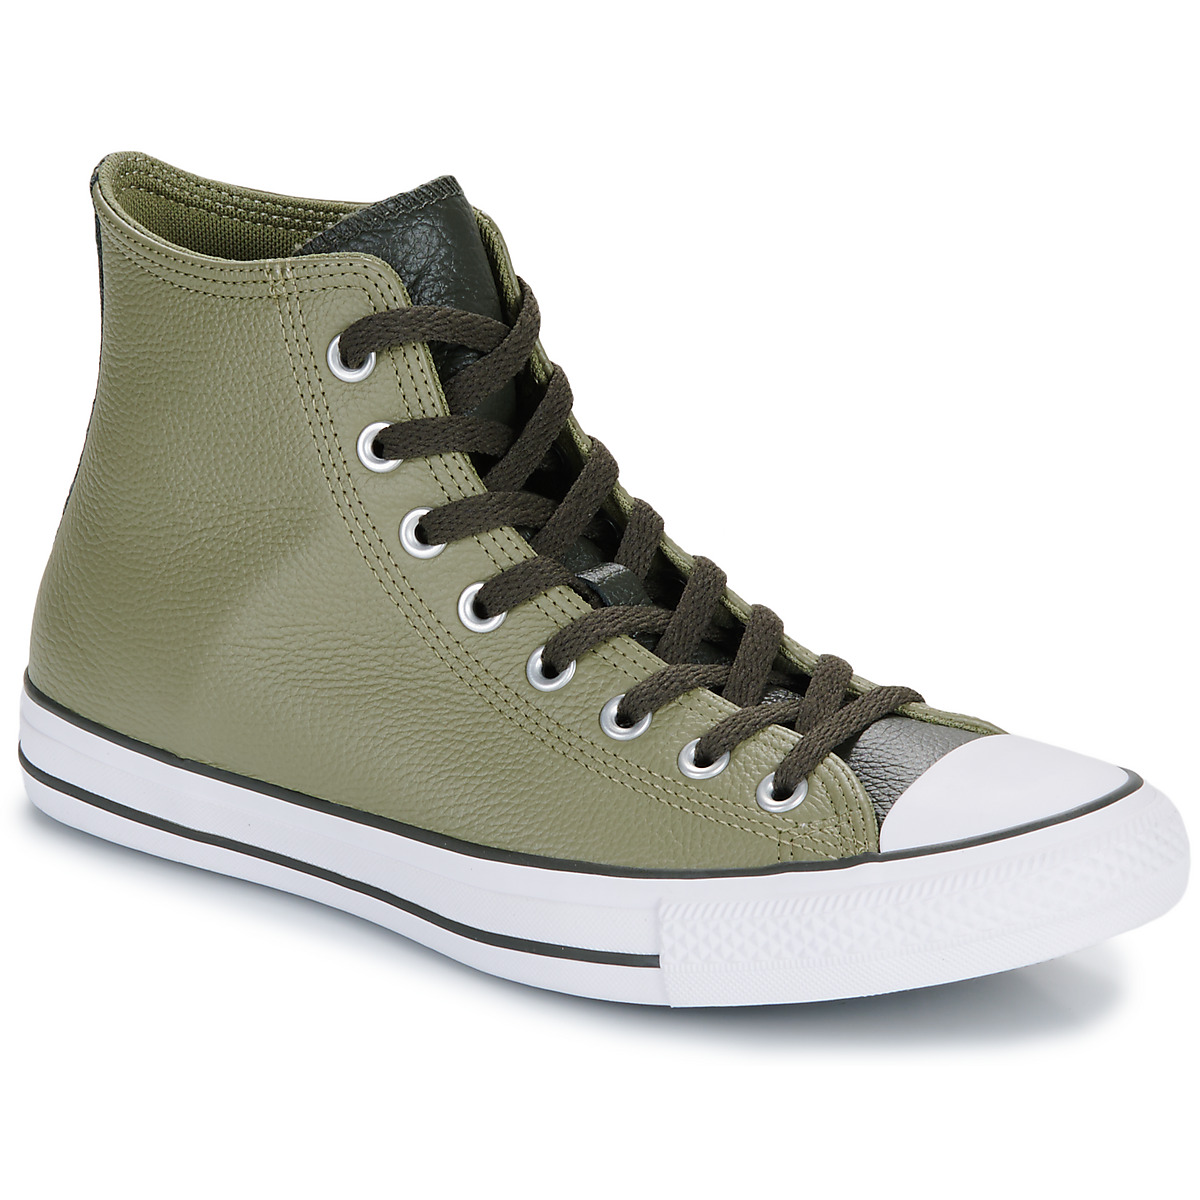 Chaussures Homme Baskets montantes Converse CHUCK TAYLOR ALL STAR 